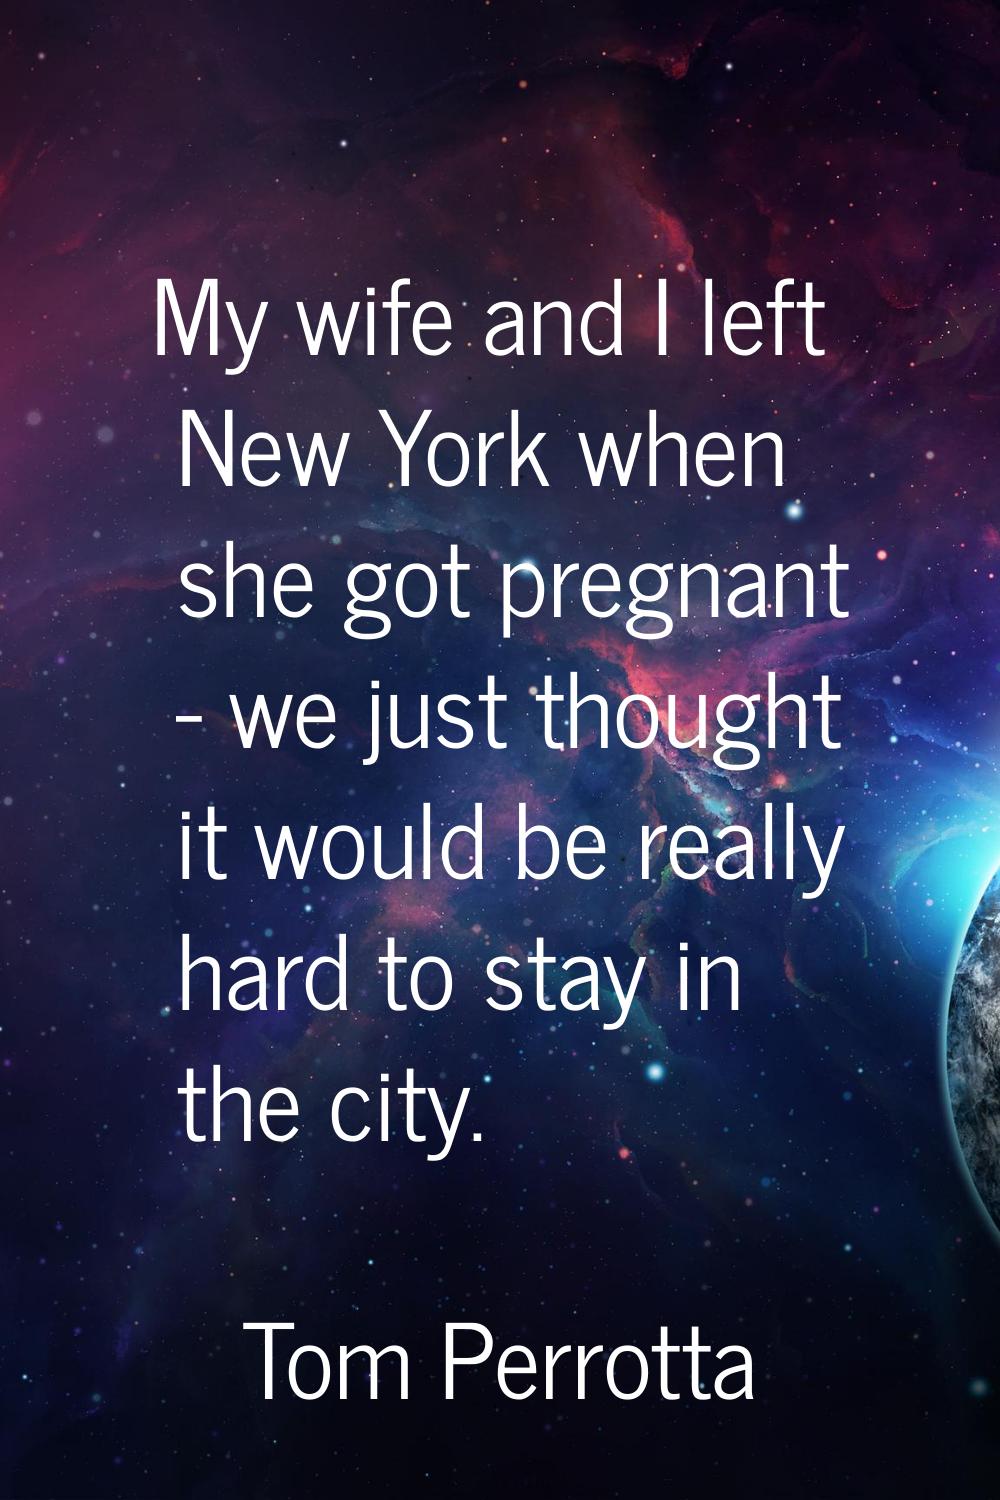 My wife and I left New York when she got pregnant - we just thought it would be really hard to stay